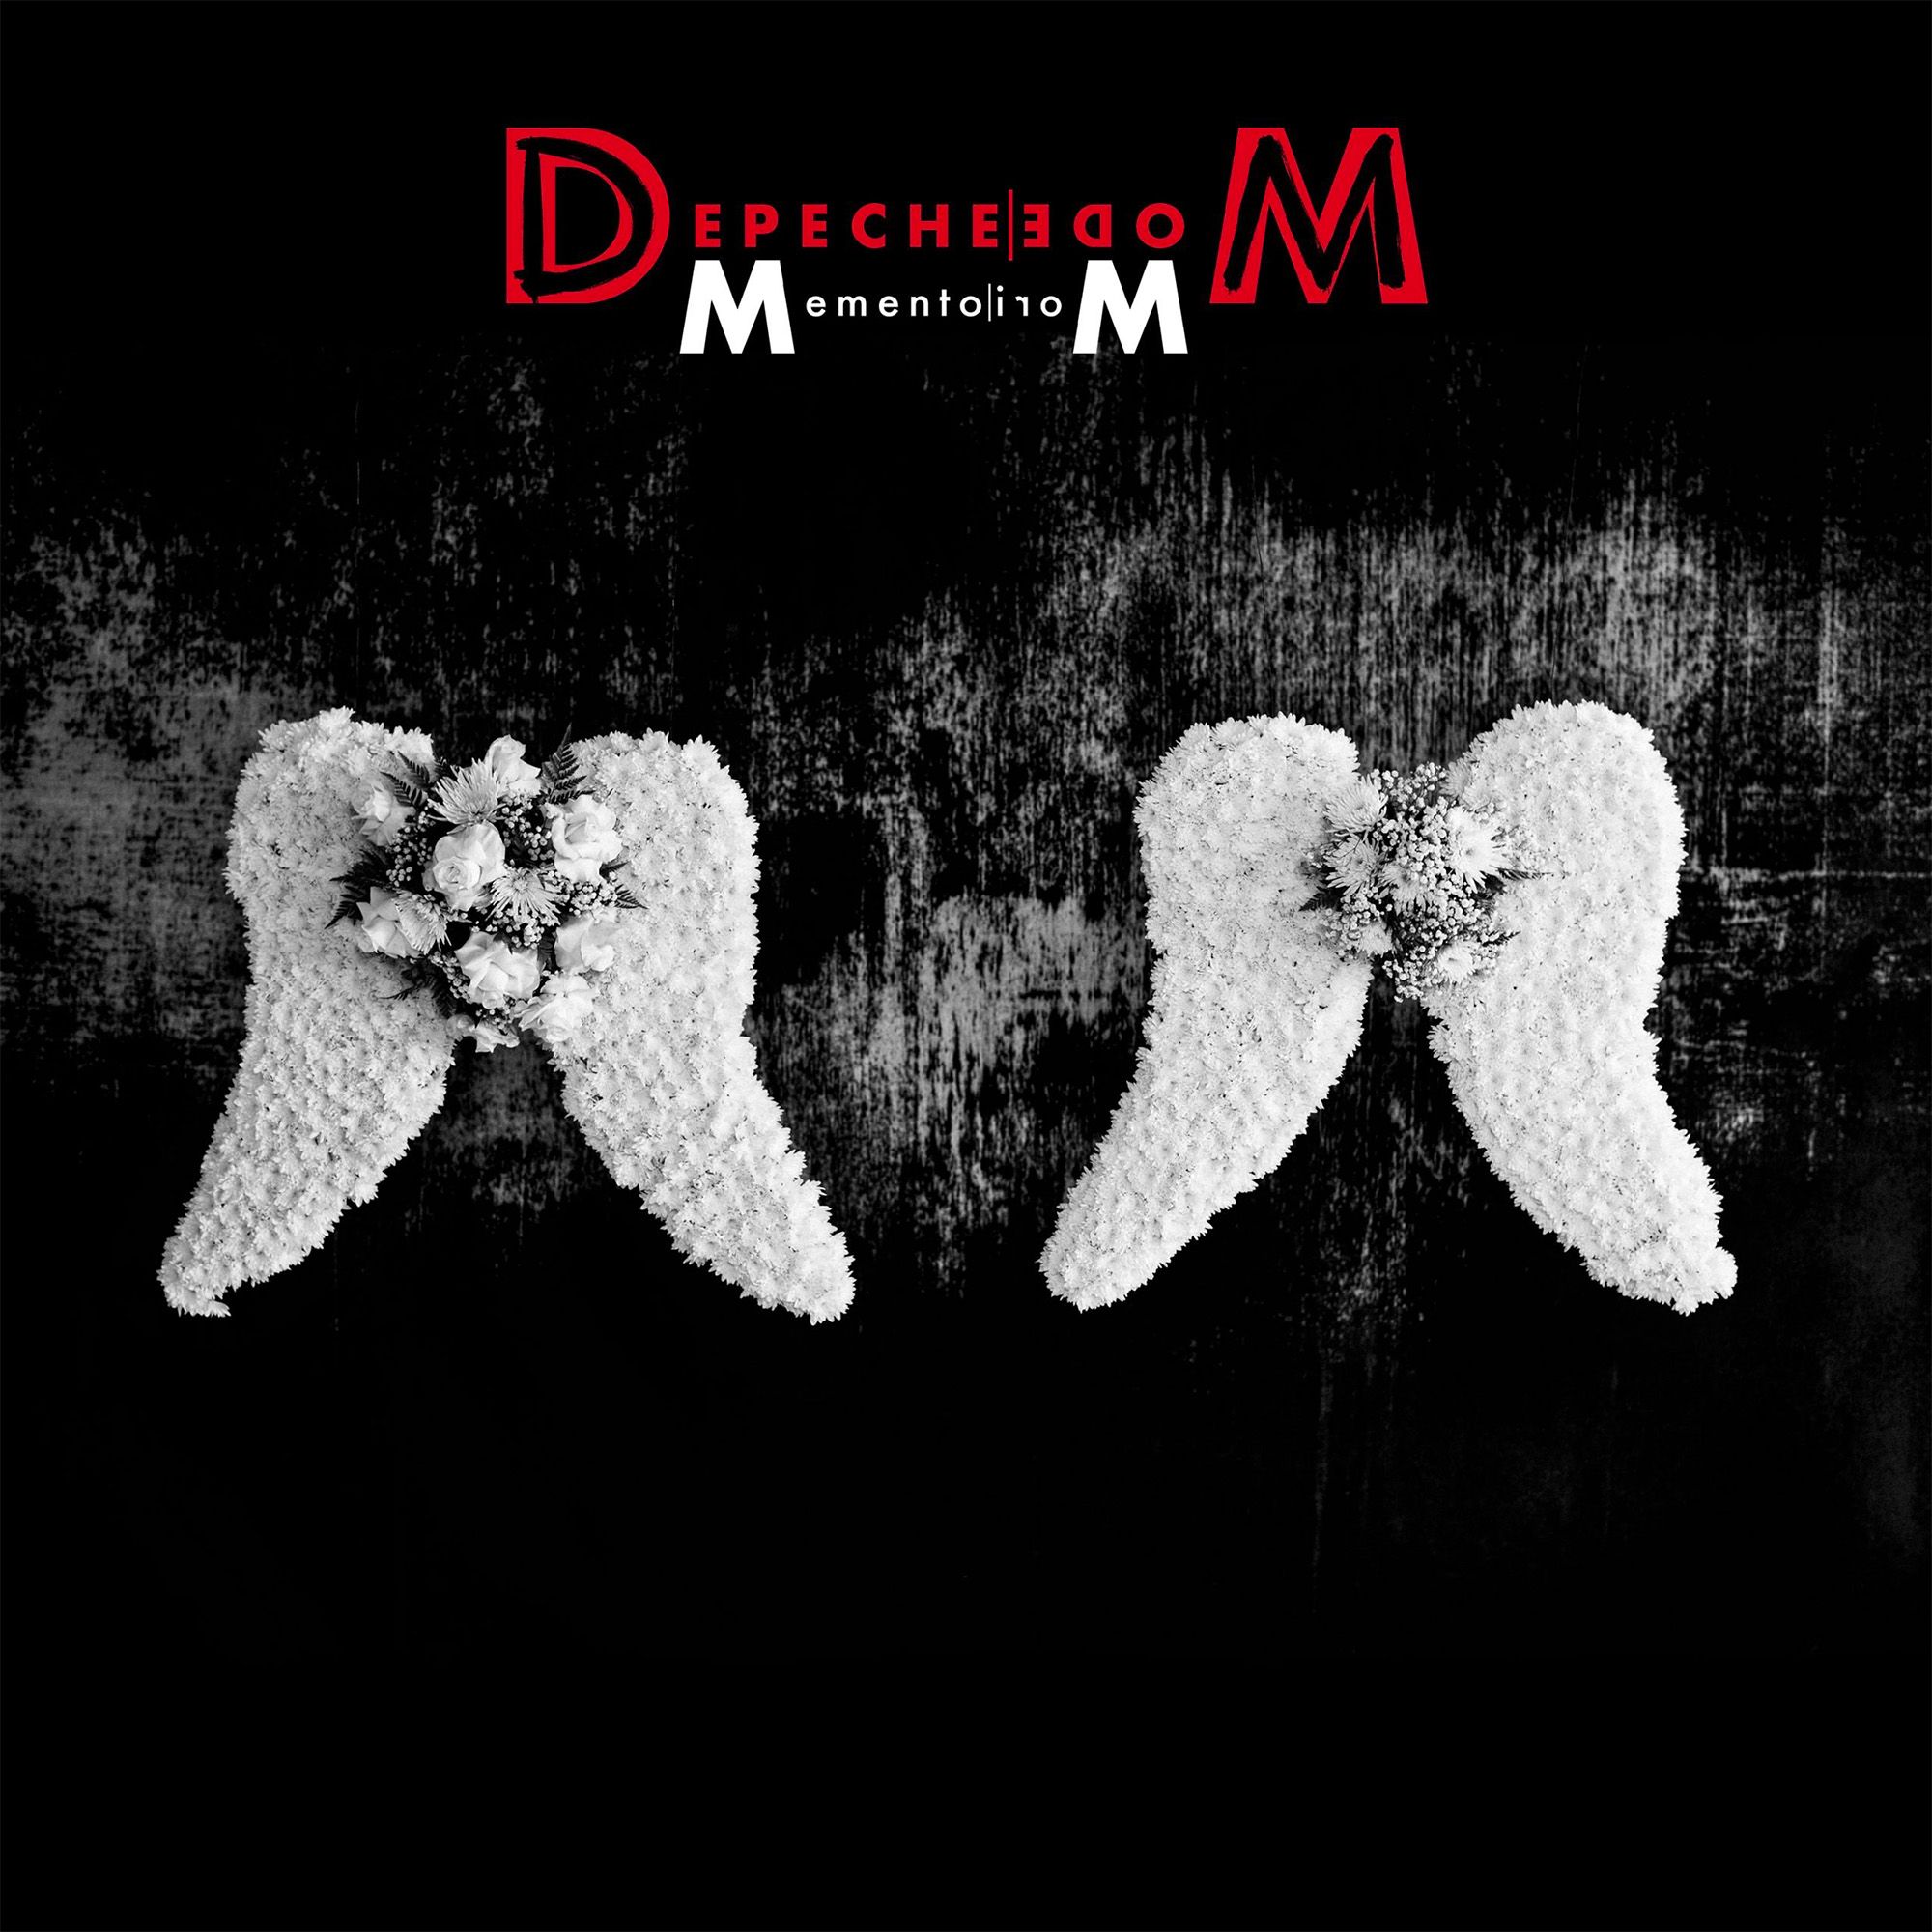 New Depeche Mode Single: ‘Ghosts Again’ to Open Upcoming Album!